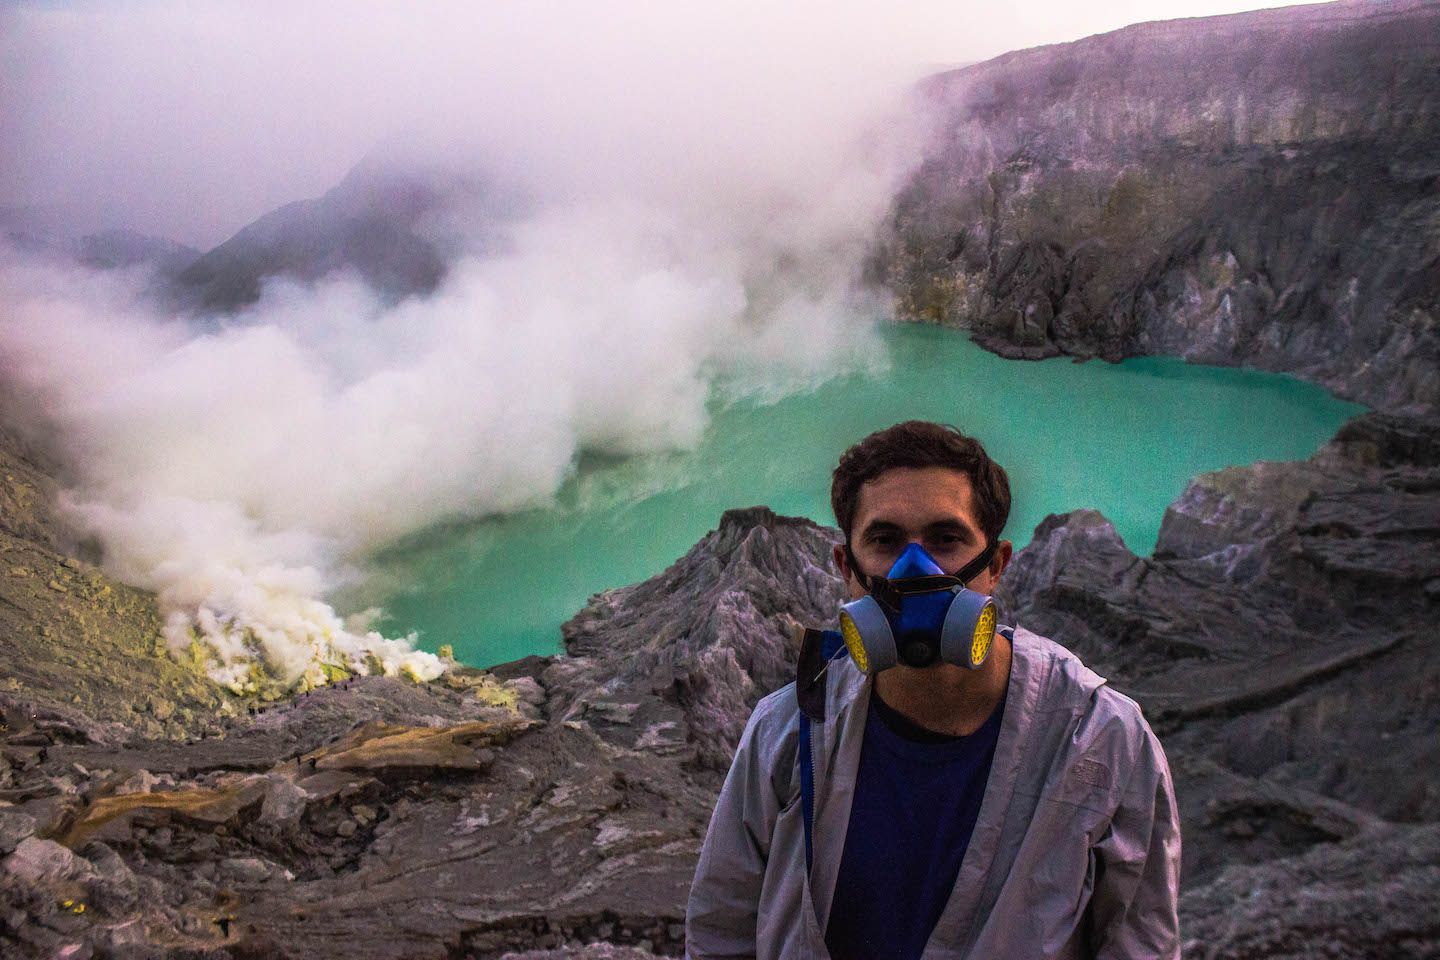 Carlos at the crater of Mt. Ijen, Indonesia